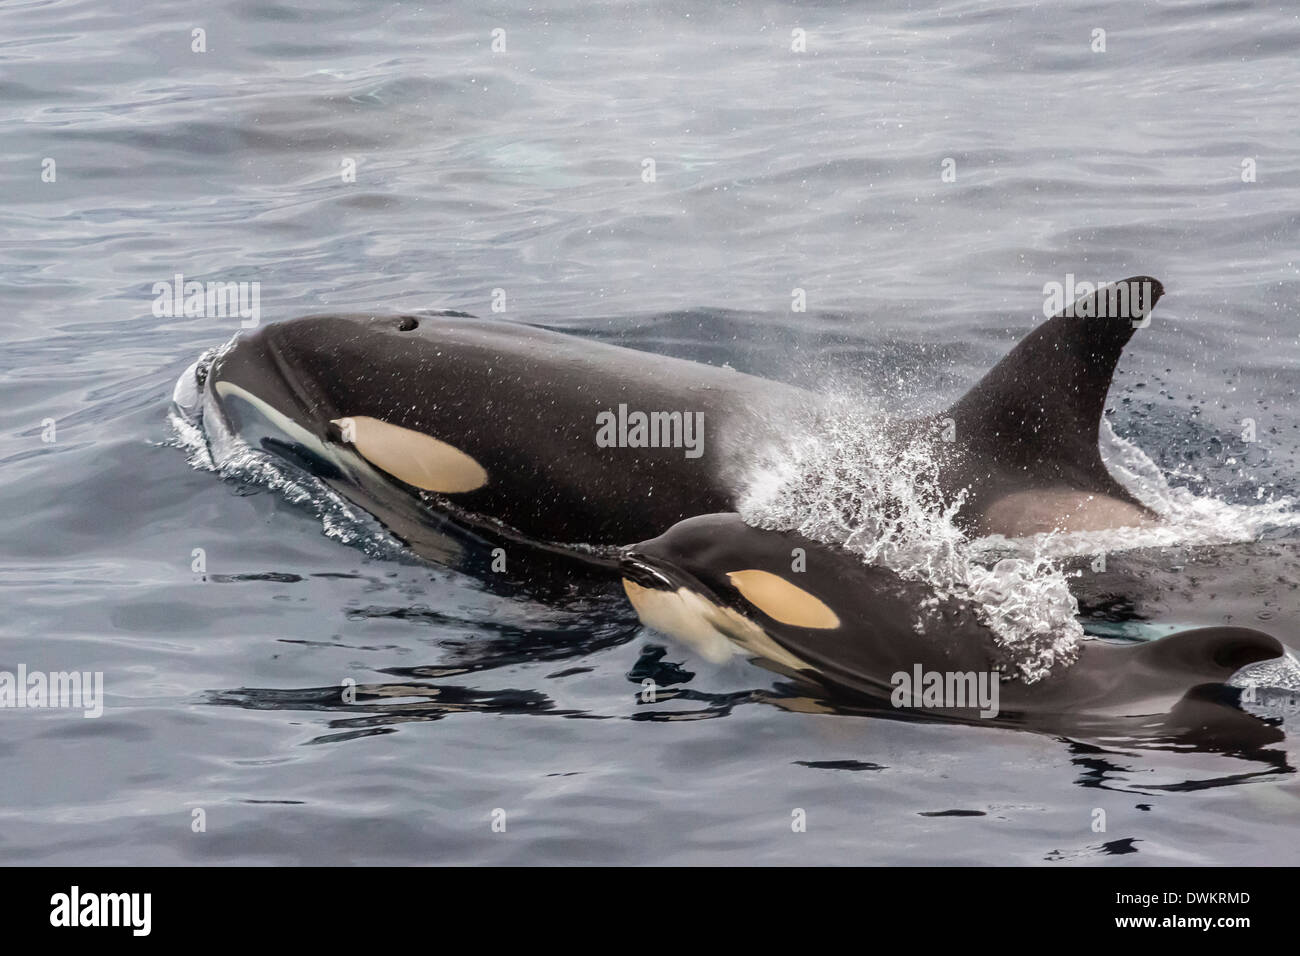 An adult killer whale (Orcinus orca) surfaces next to a calf off the Cumberland Peninsula, Baffin Island, Nunavut, Canada Stock Photo